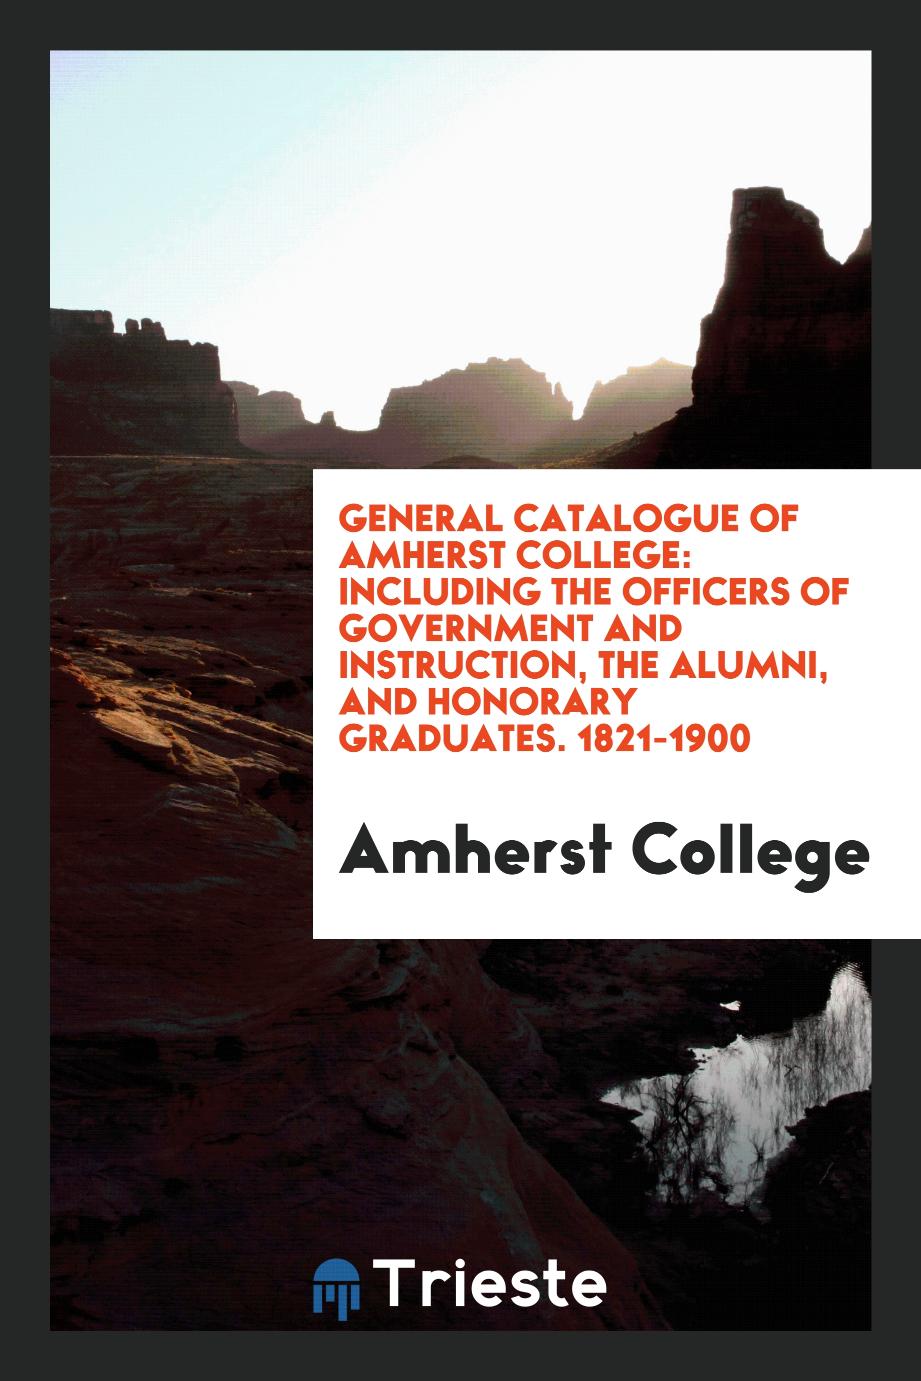 General Catalogue of Amherst College: Including the Officers of Government and Instruction, the Alumni, and Honorary Graduates. 1821-1900